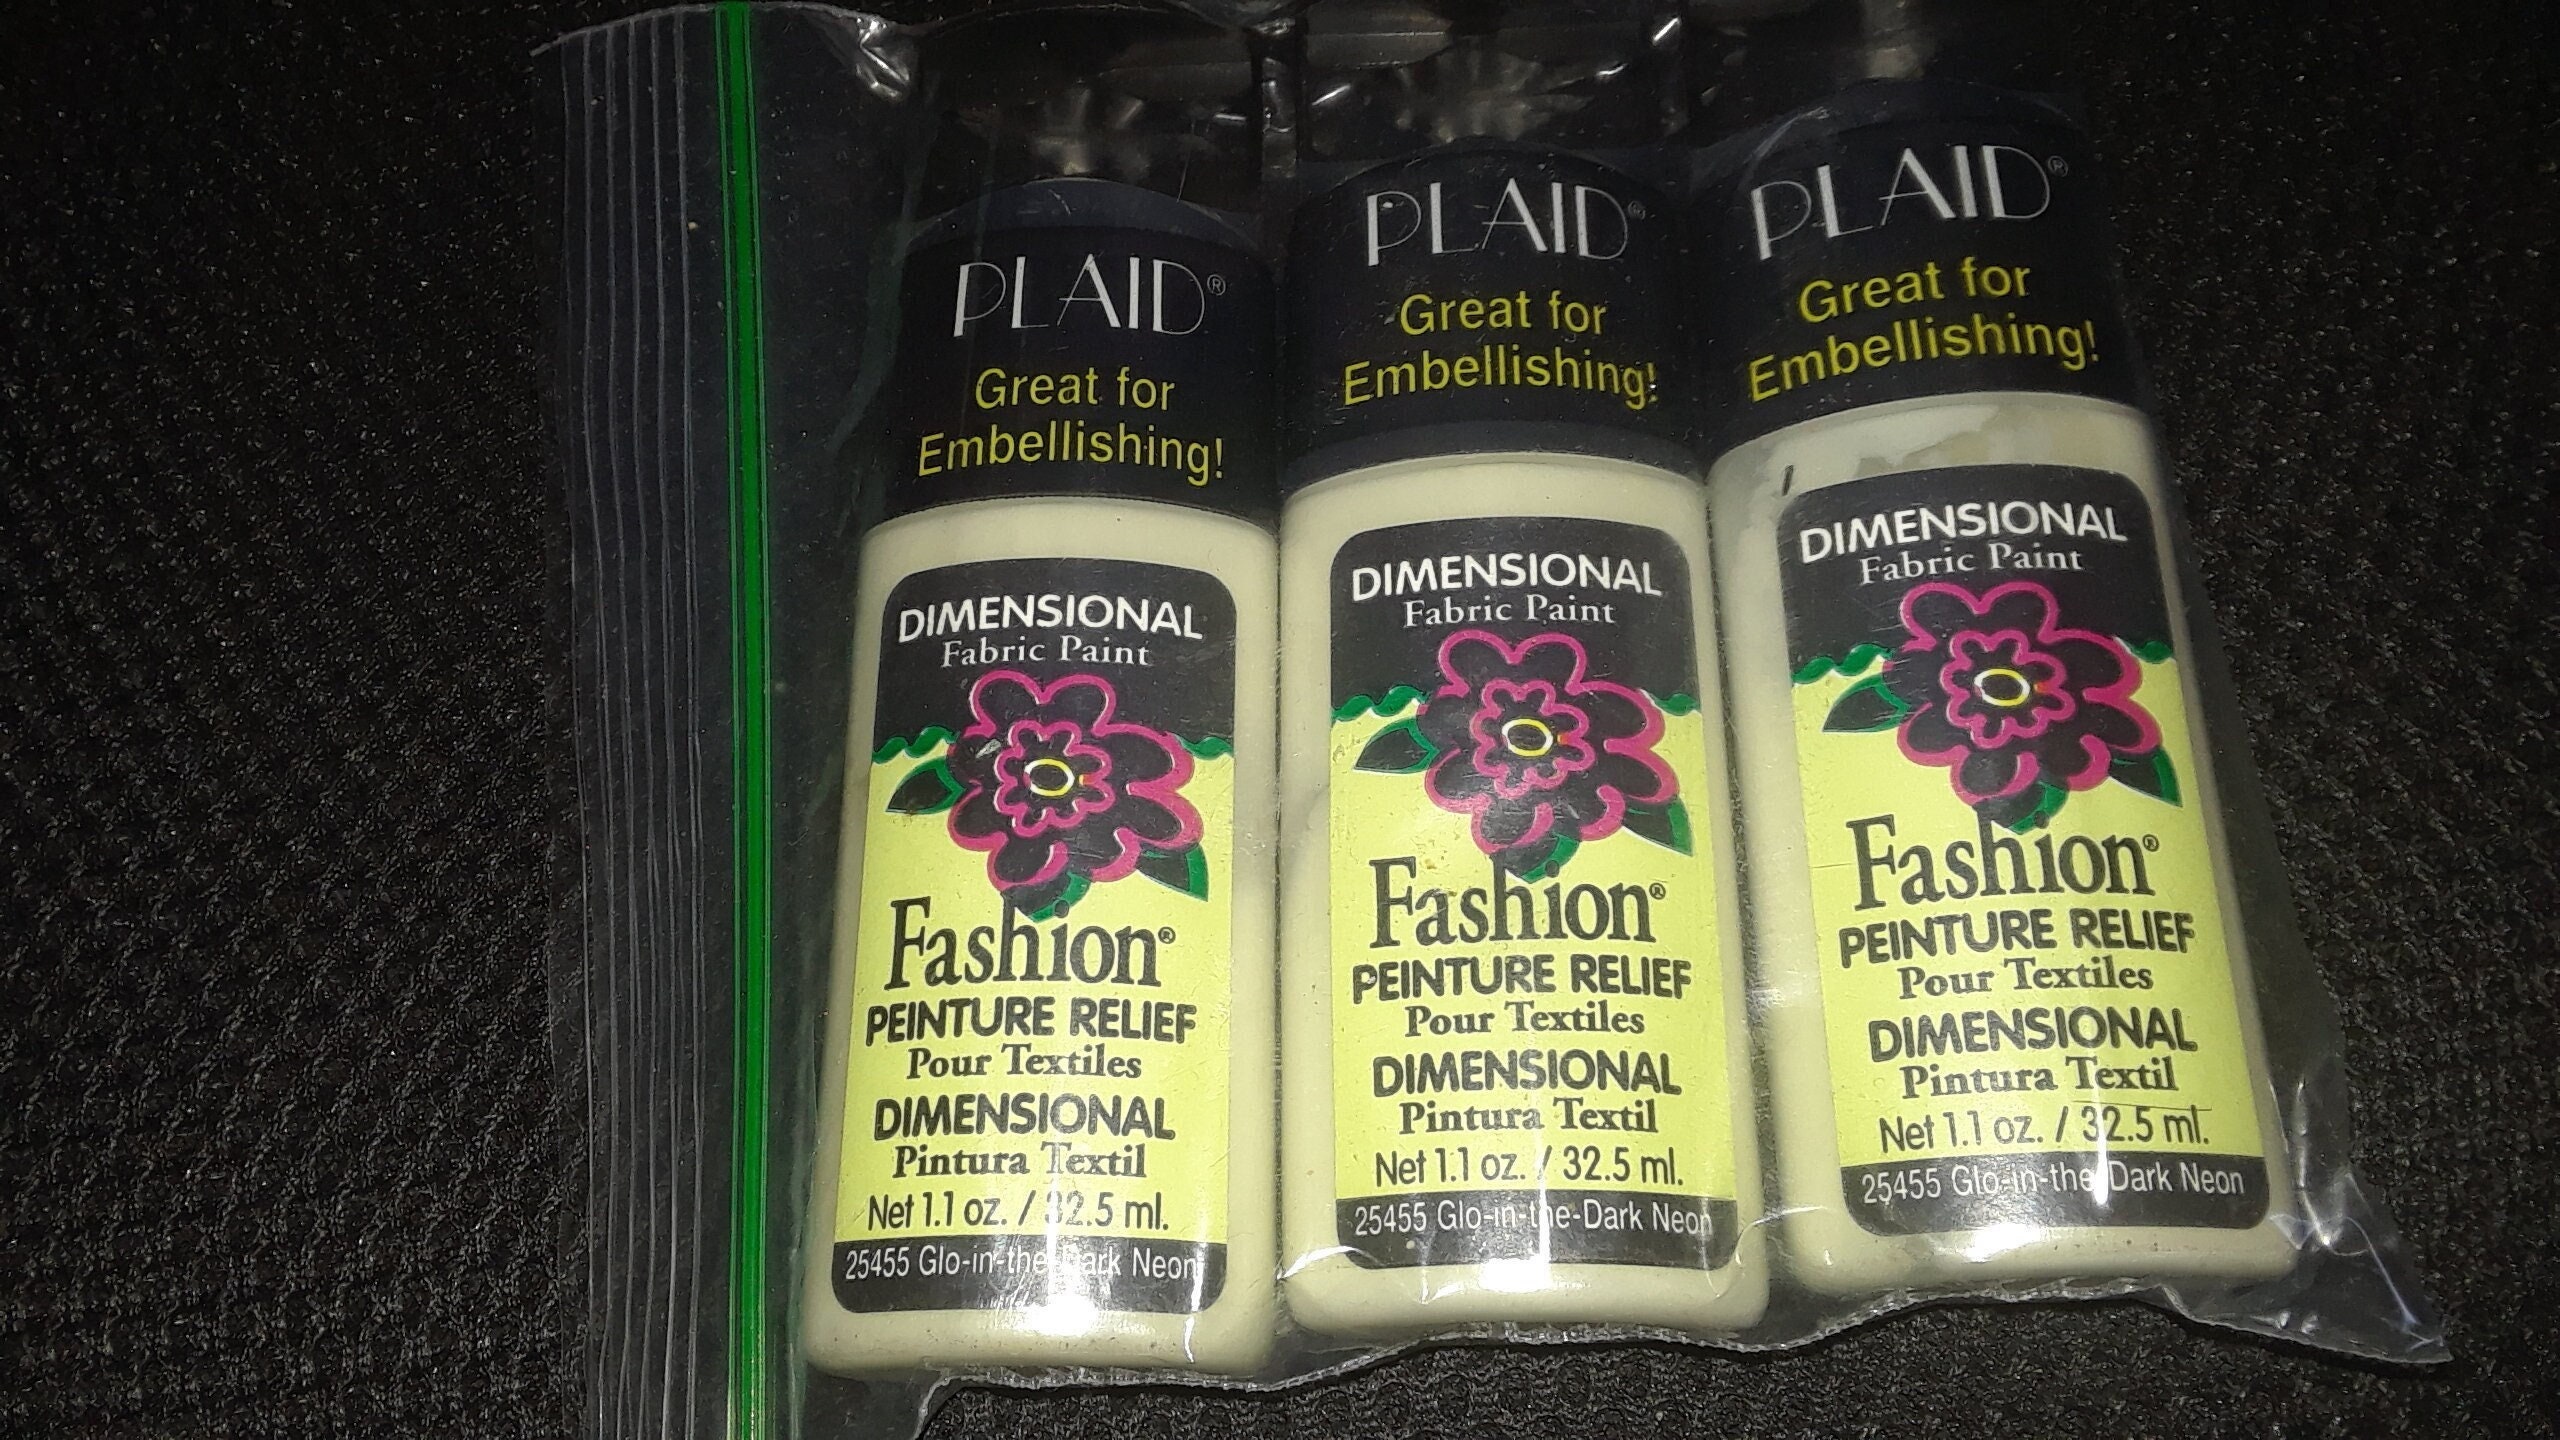 3 Plaid Dimensional Fabric Paints, Glow in the Dark Neon, New